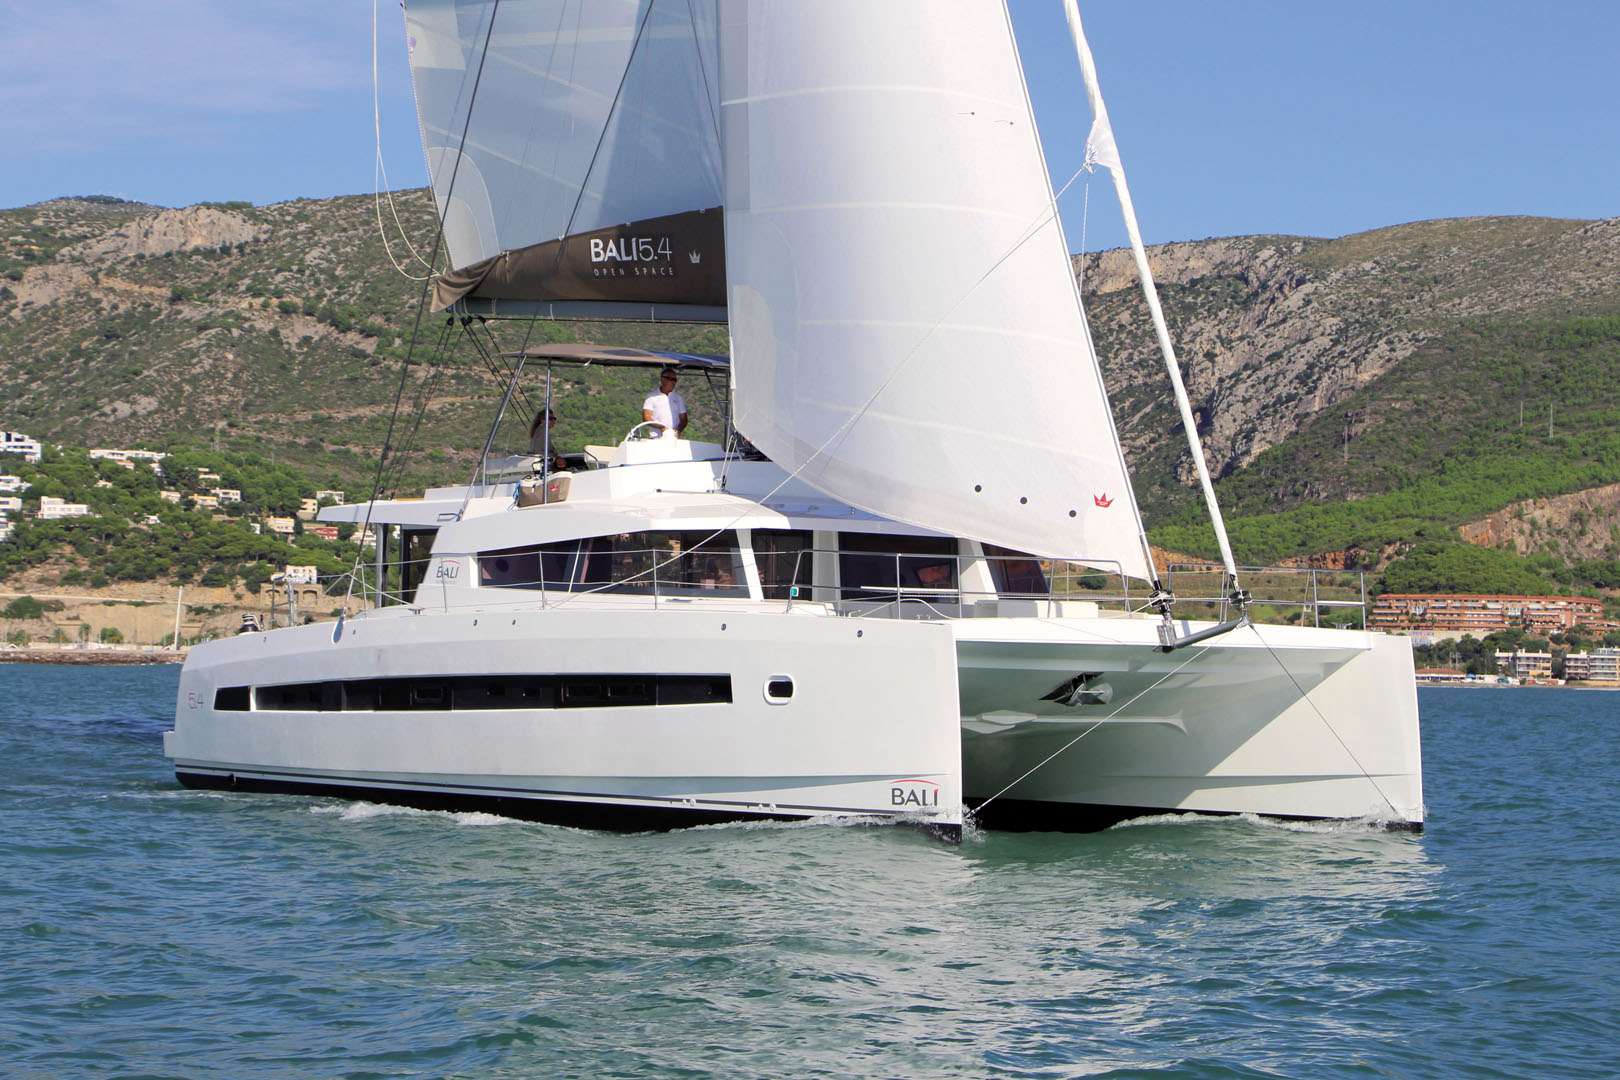 TWO OCEANS - Catamaran Charter The Canaries & Boat hire in W. Med - Spain/Balearics, Caribbean Leewards, Caribbean Windwards, Caribbean Virgin Islands (BVI) 1